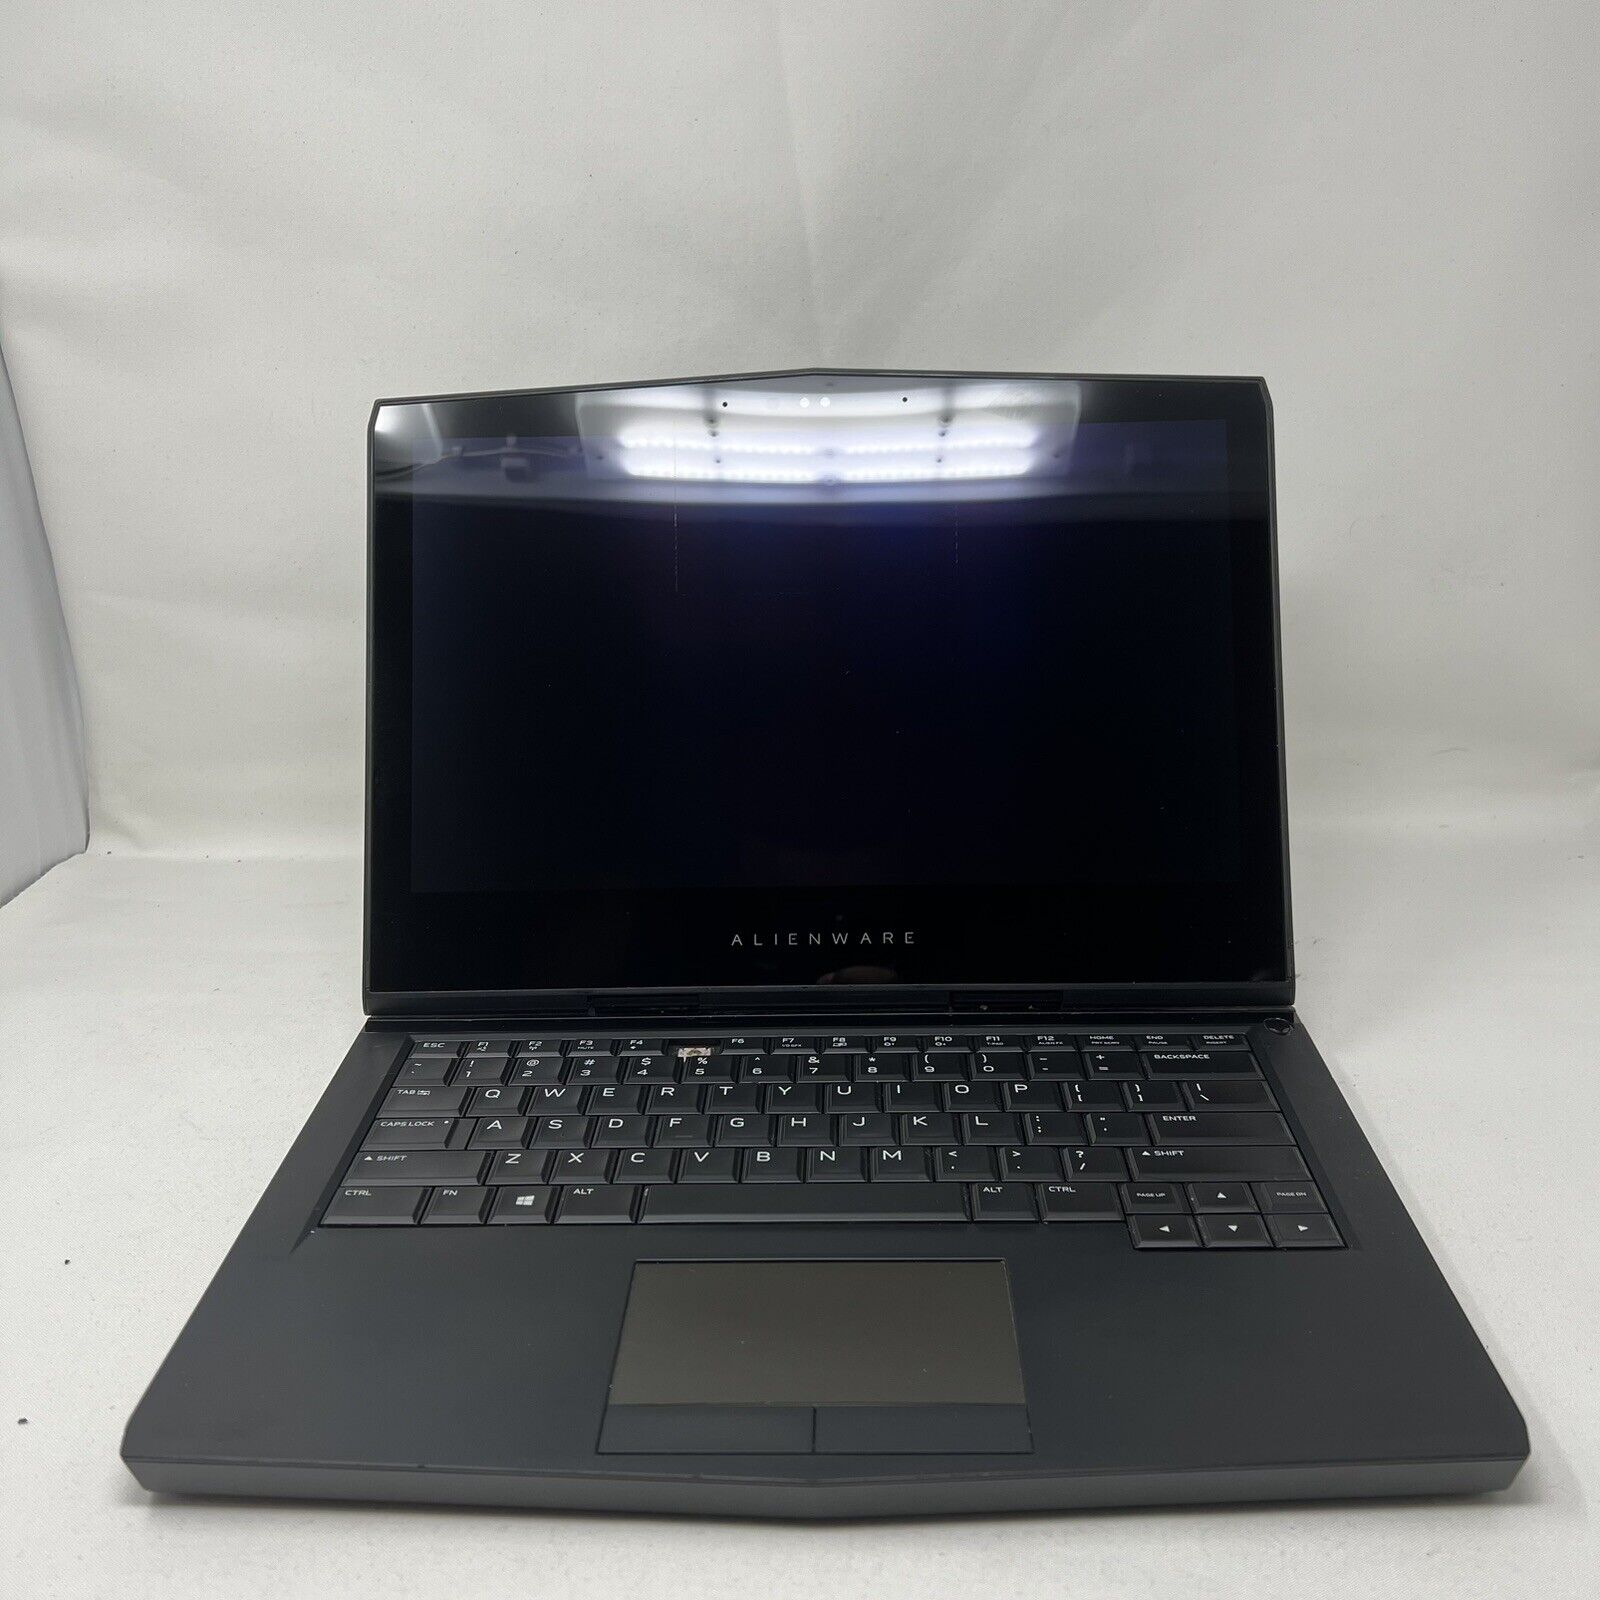 Alienware 13 R3 Gaming Laptop - i7-6700HQ - AS/IS - No Returns